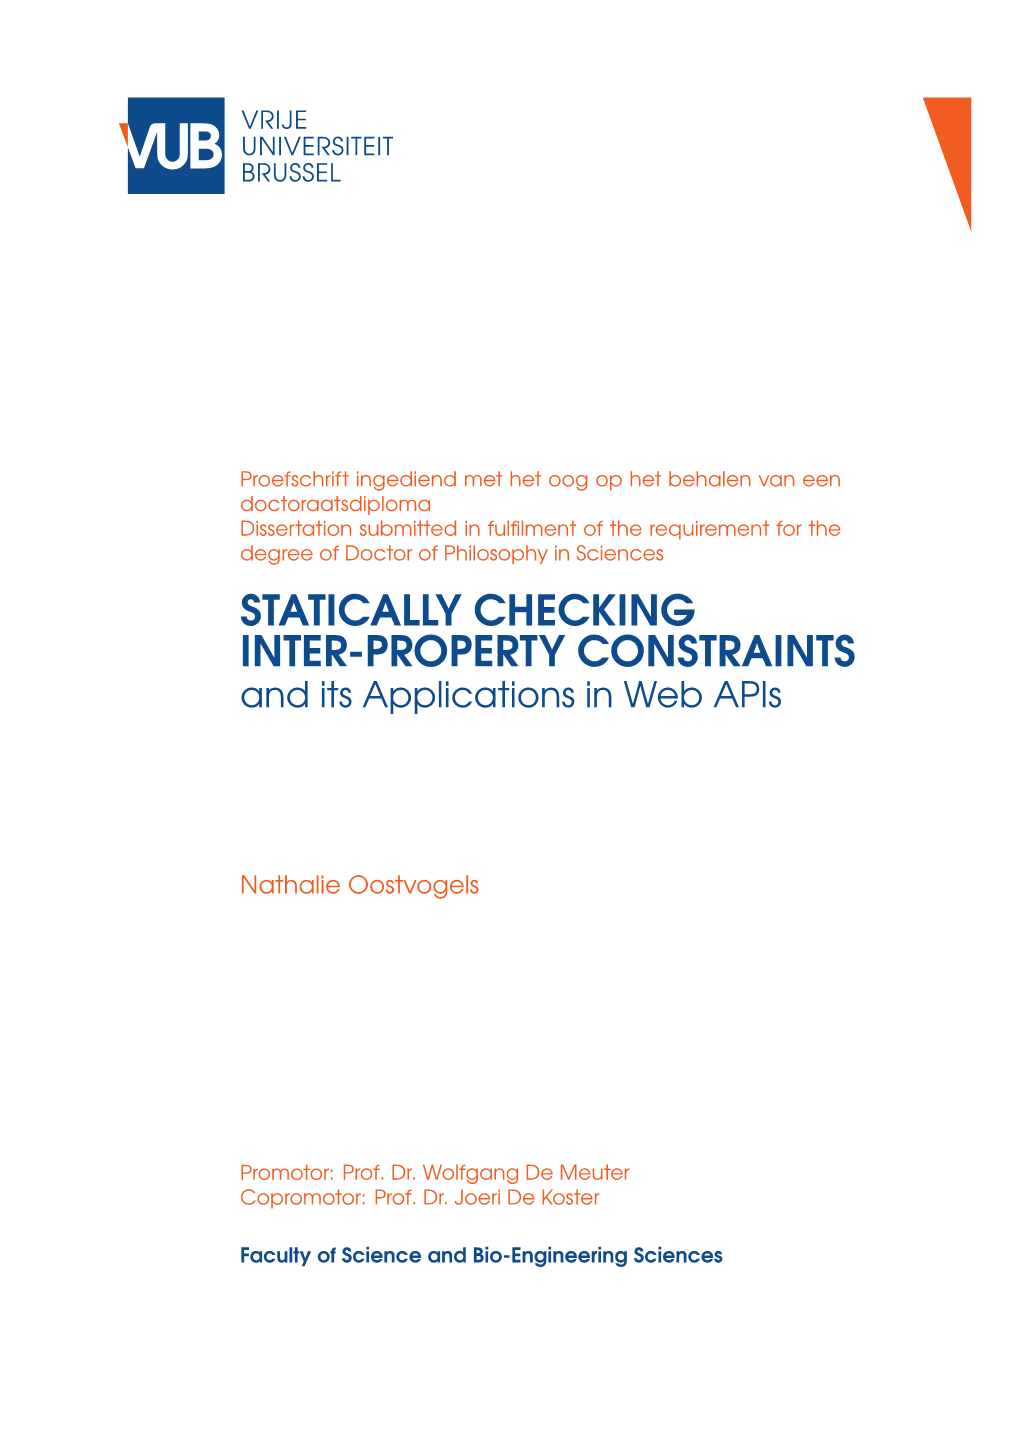 STATICALLY CHECKING INTER-PROPERTY CONSTRAINTS and Its Applications in Web Apis